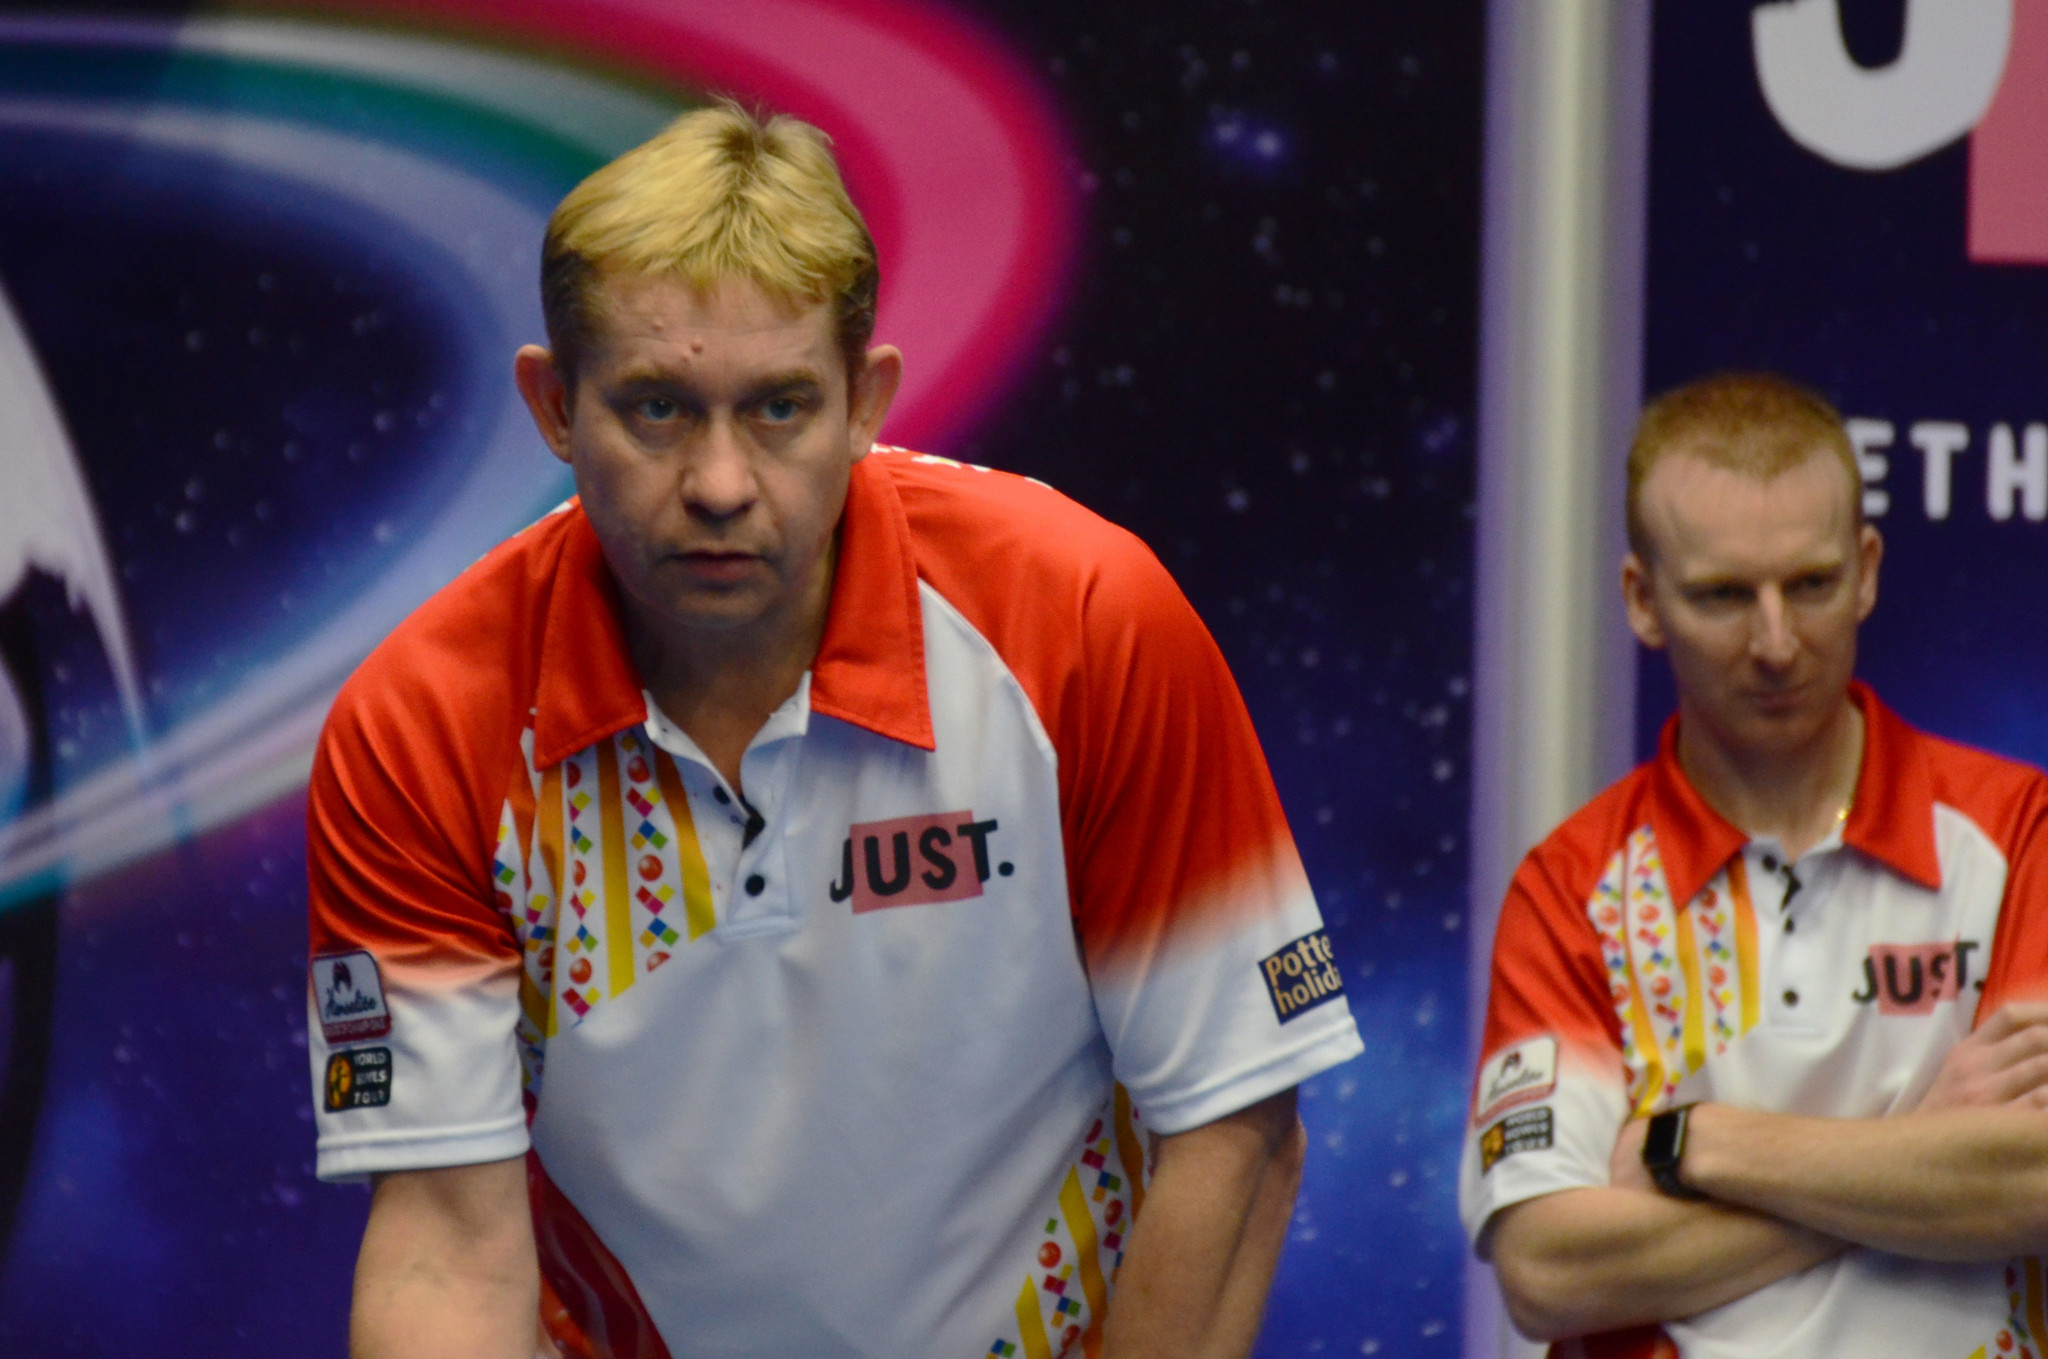 Greg Harlow and Nick Brett of England progressed to the men's pair semi-finals of the World Indoor Bowls Championships ©World Bowls